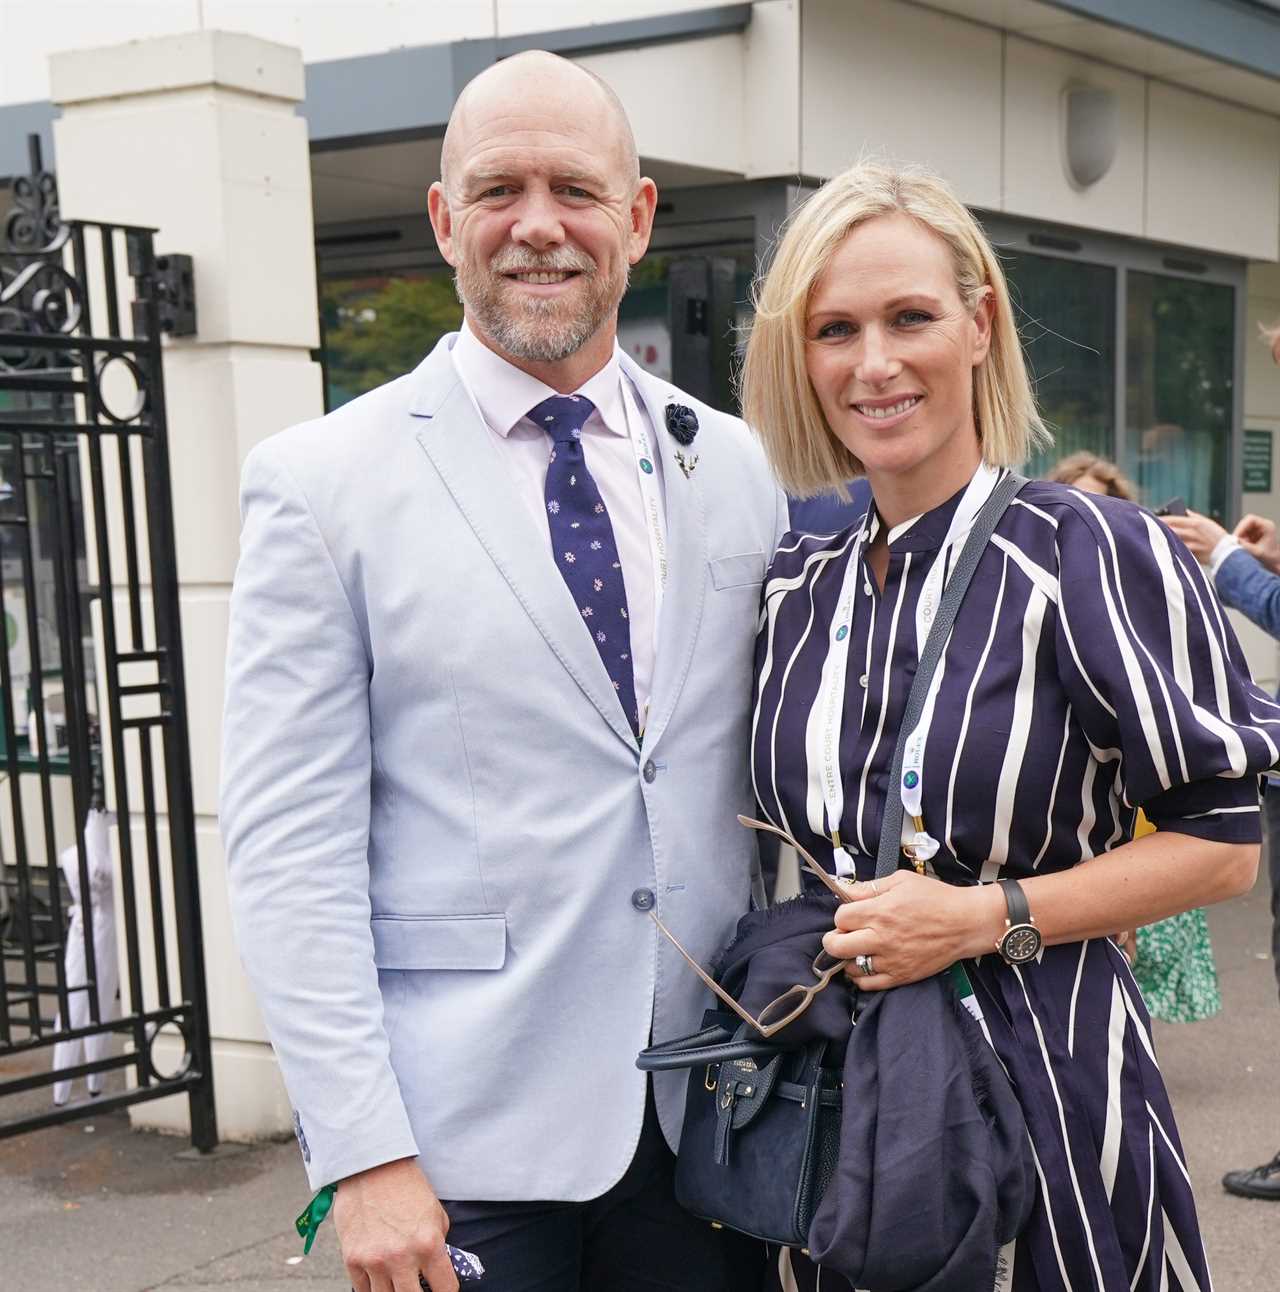 I’m A Celebrity’s Mike Tindall has arrived in Australia